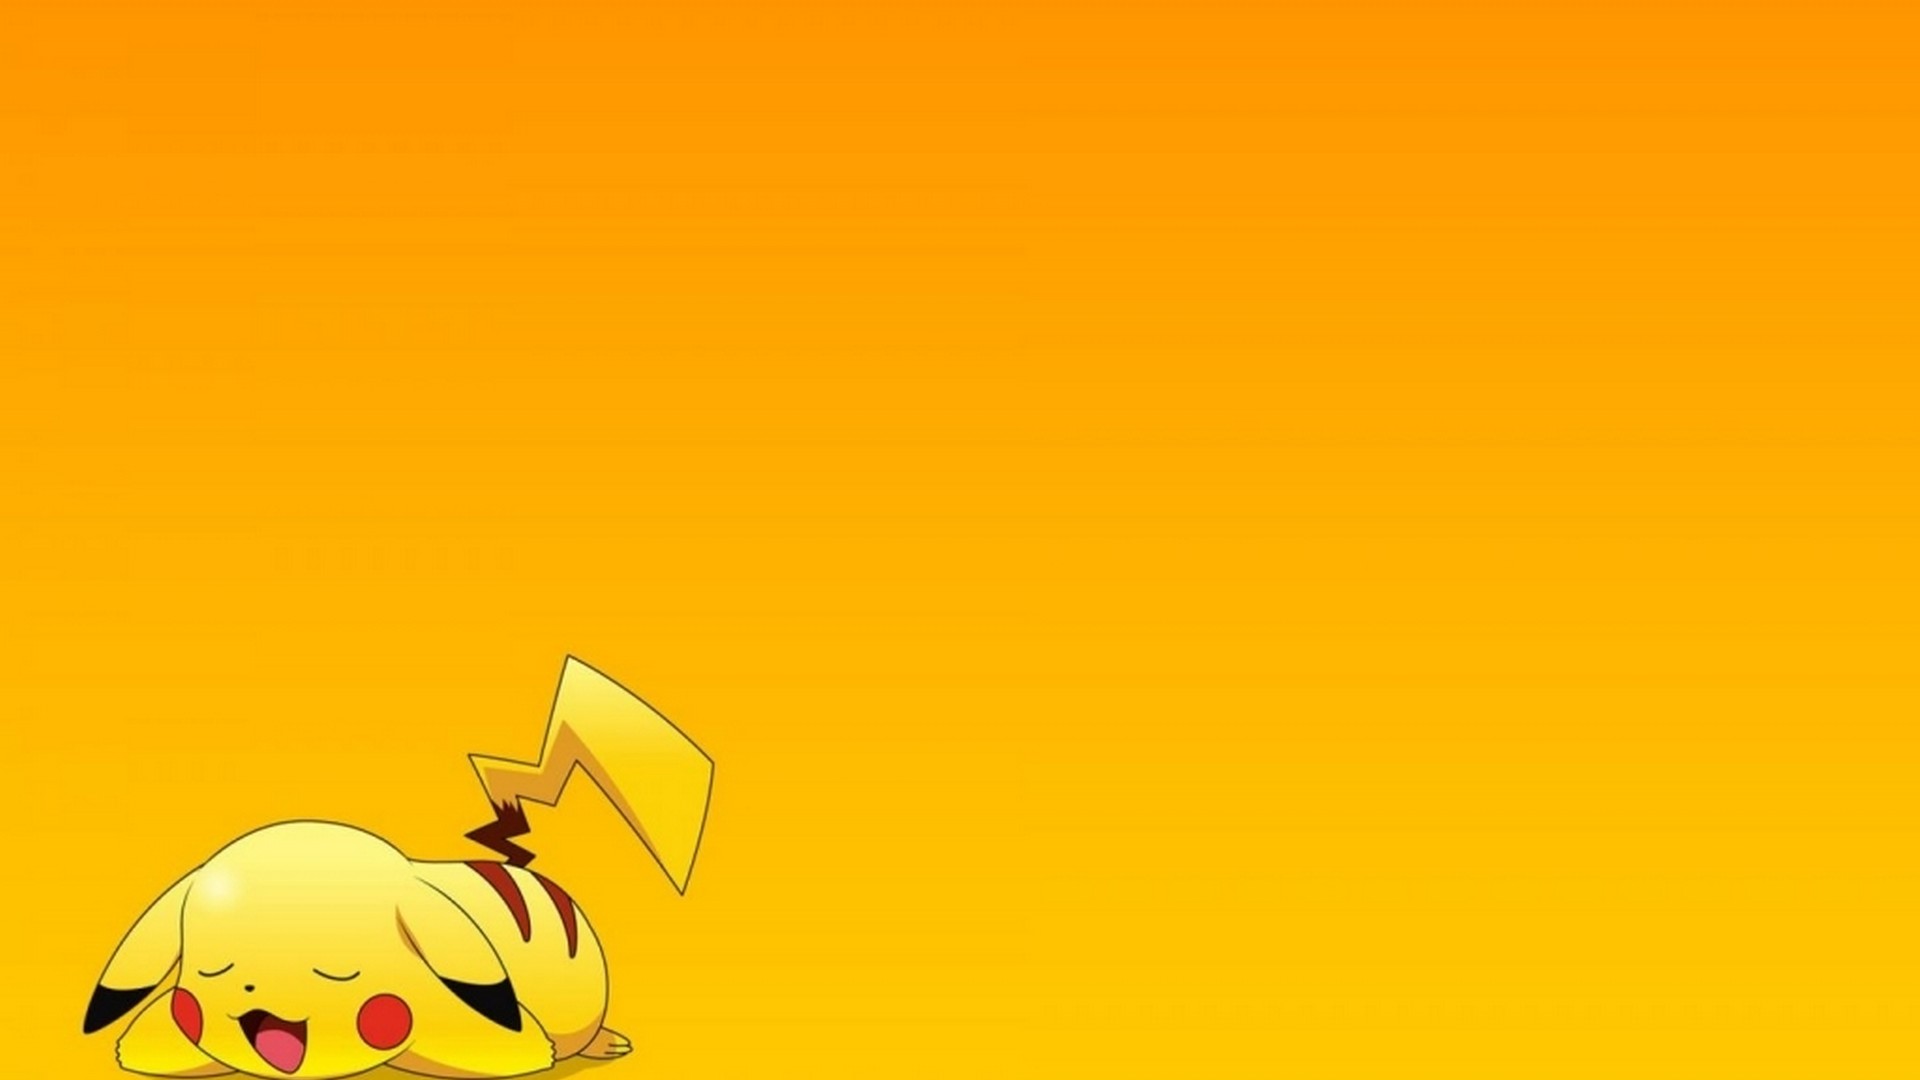 HD Yellow Cute Backgrounds with image resolution 1920x1080 pixel. You can use this wallpaper as background for your desktop Computer Screensavers, Android or iPhone smartphones